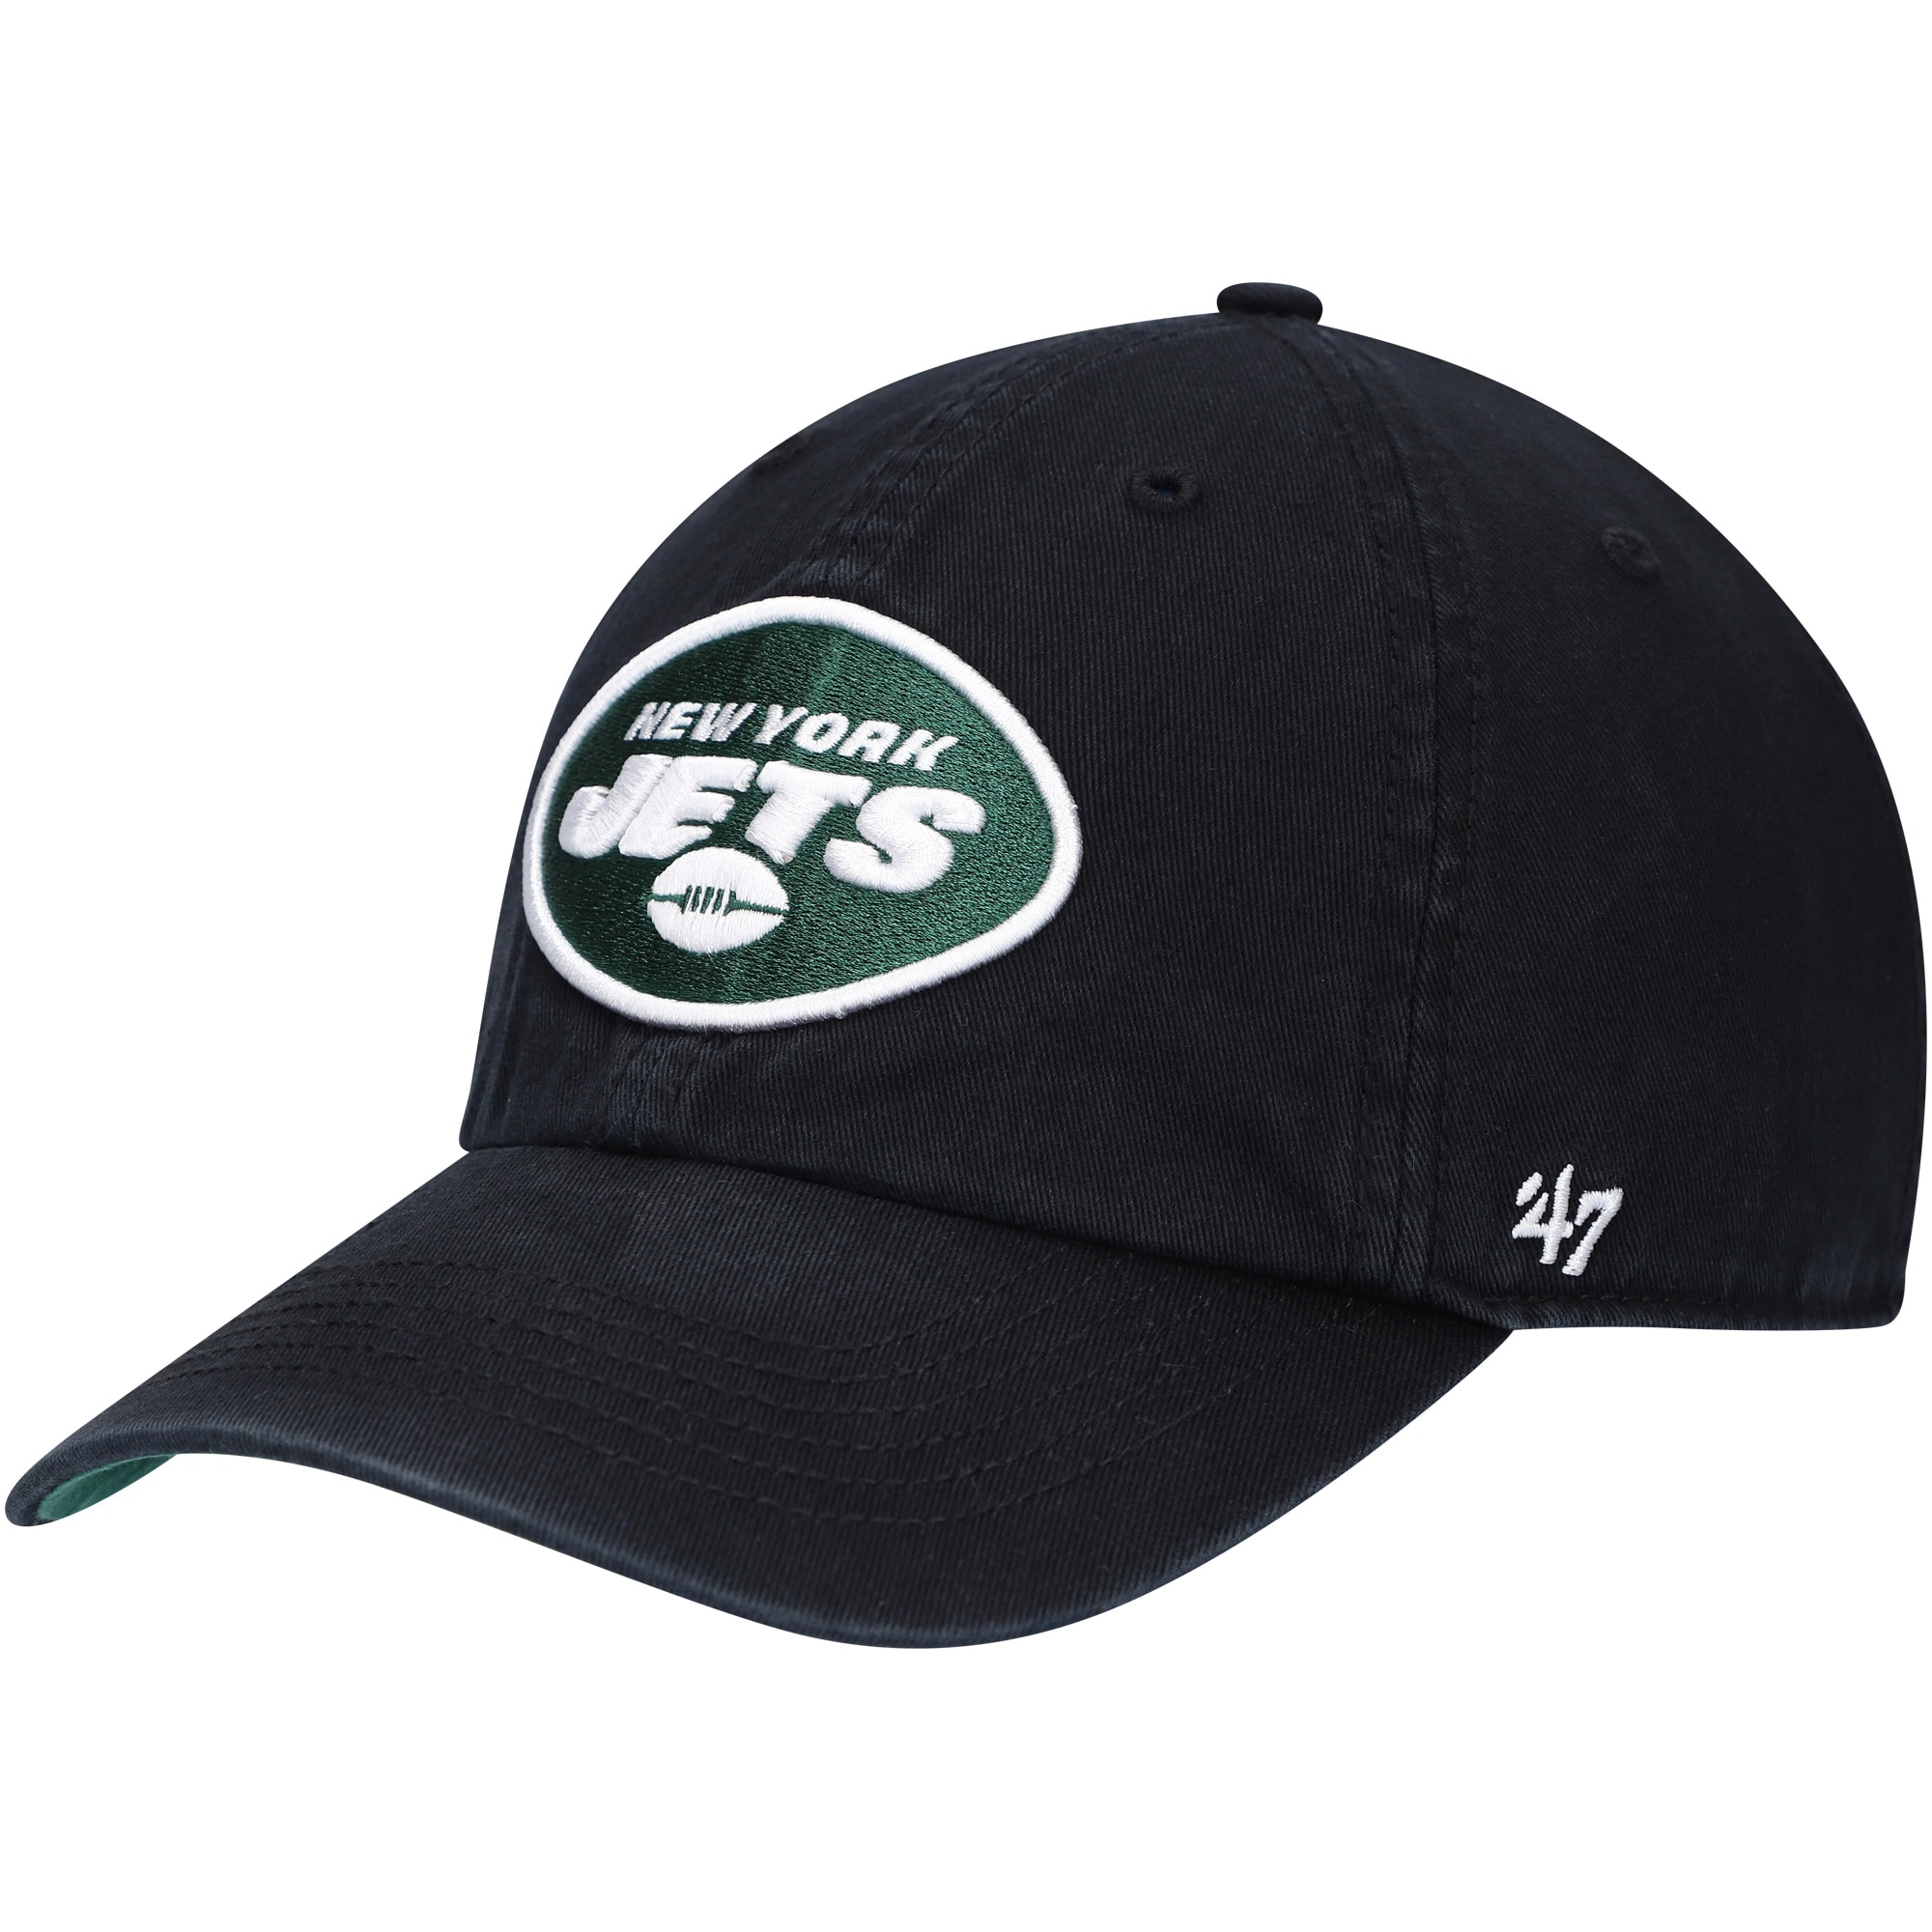 new york jets snapback mitchell and ness